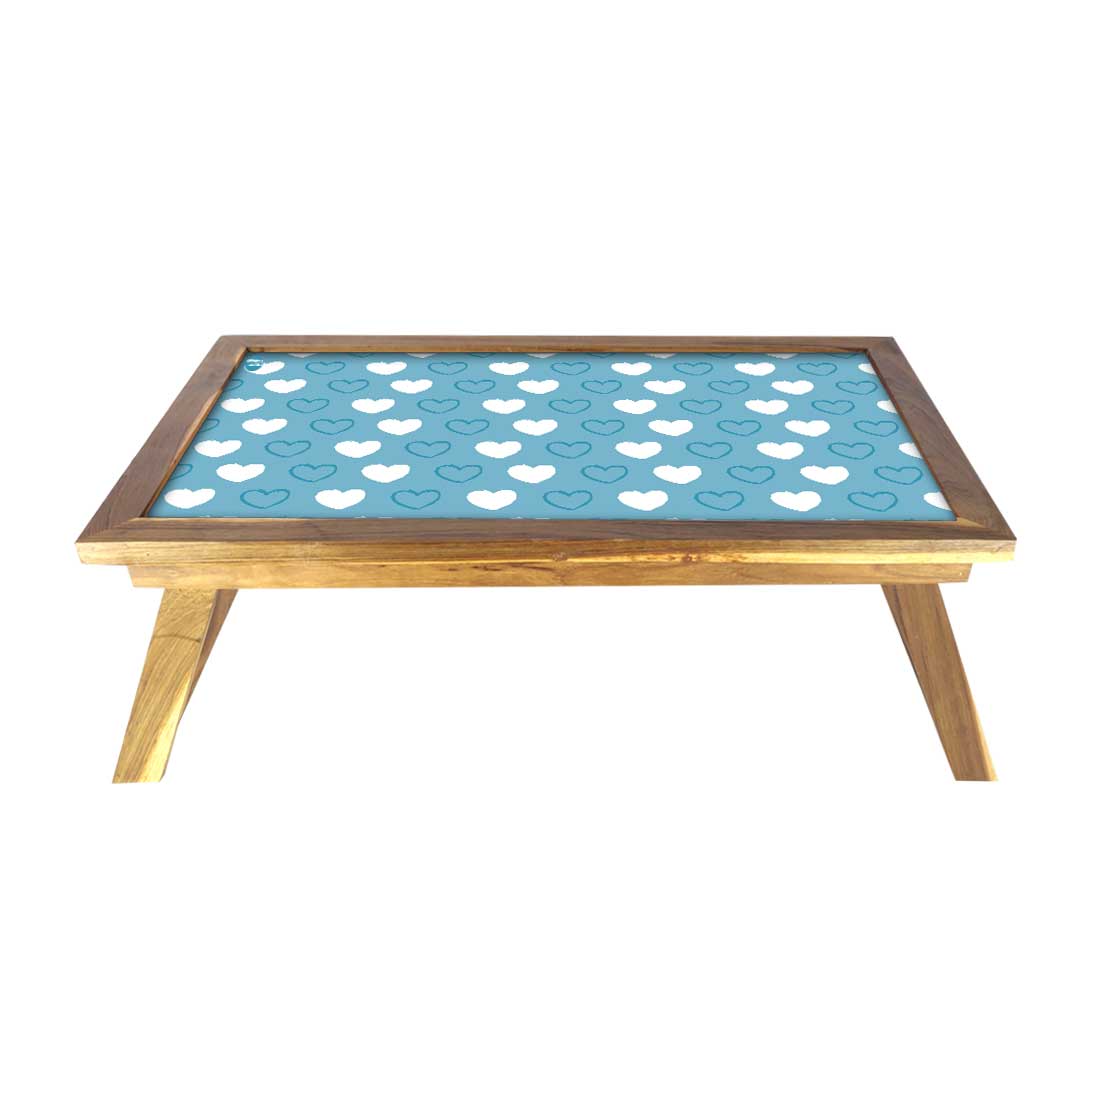 Designer Laptop Tray Wooden for Bed Breakfast Table - White Hearts Nutcase